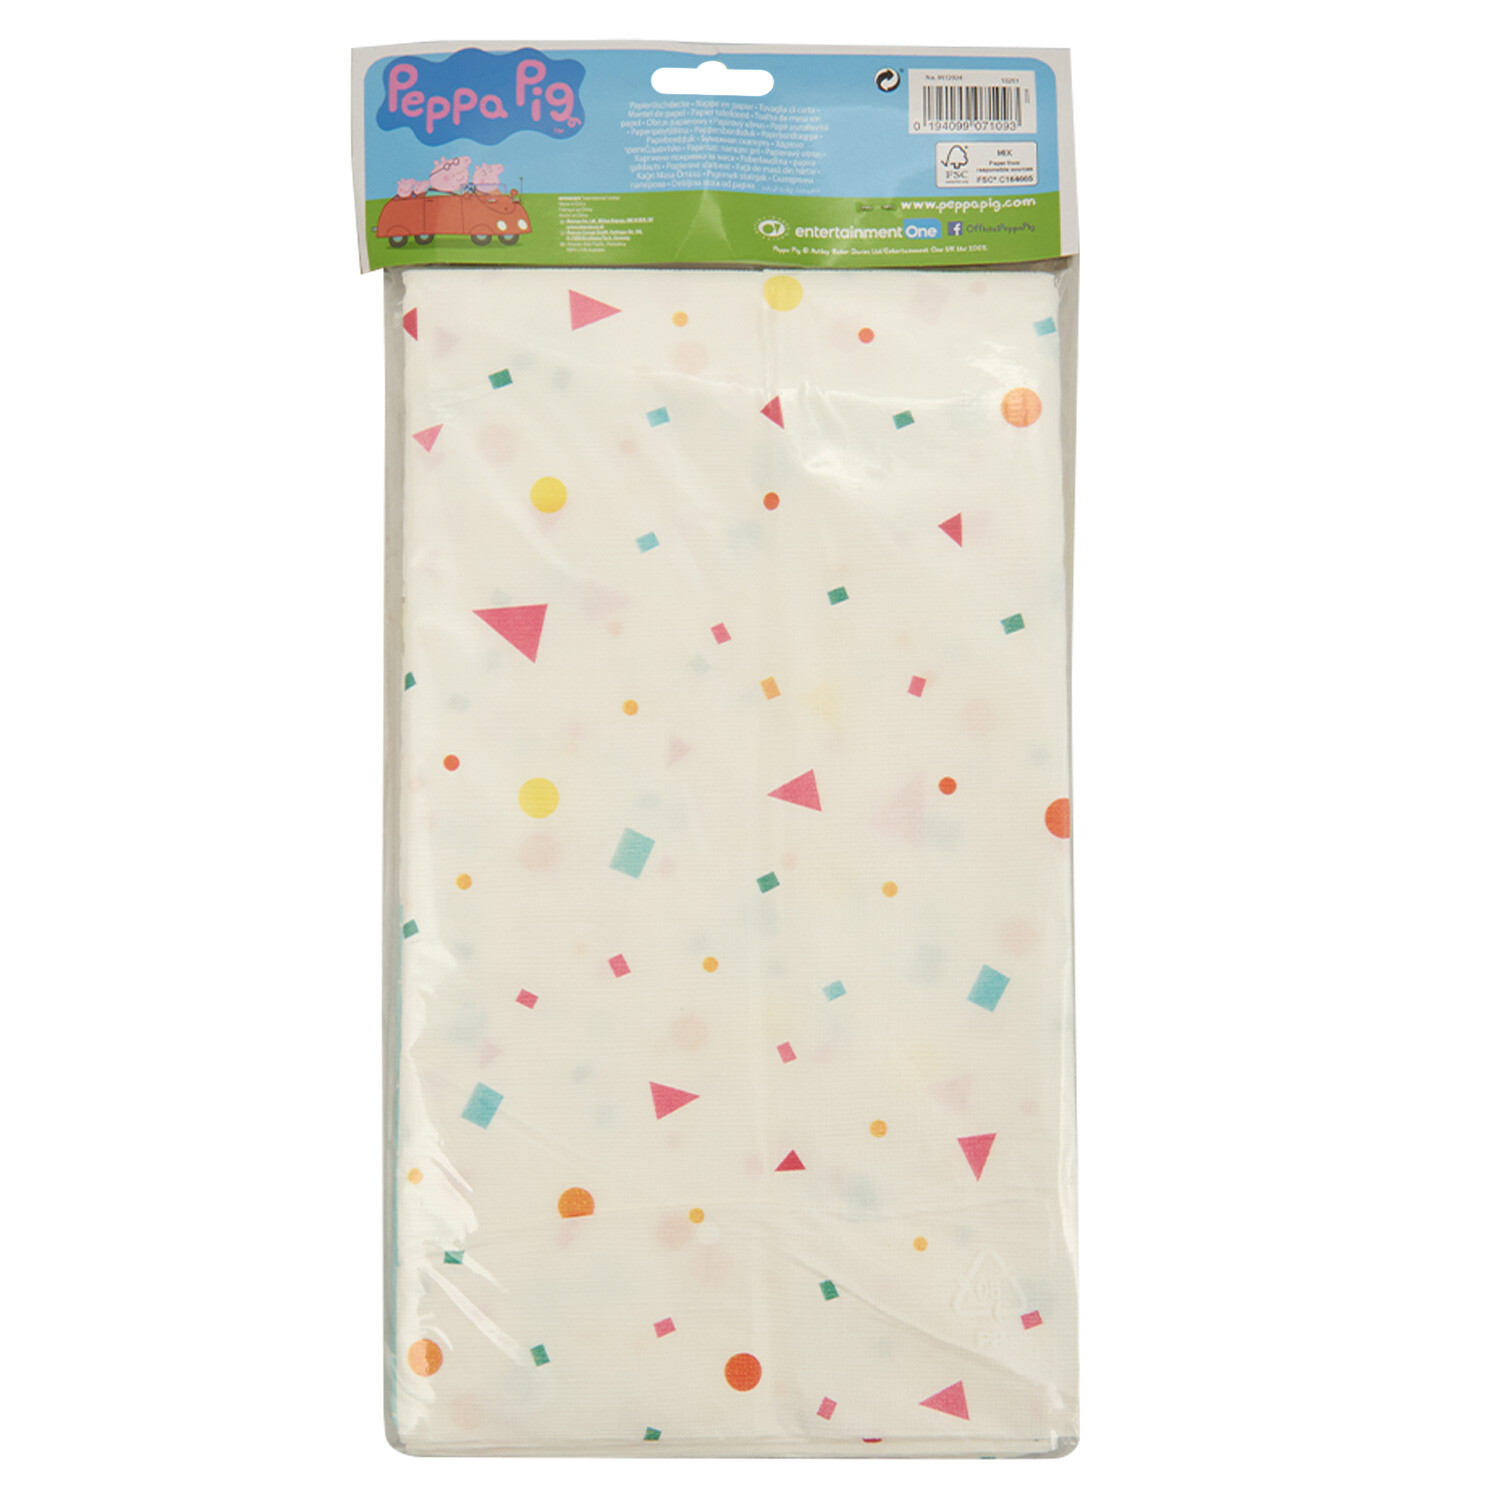 Peppa Pig Paper Tablecover - Blue Image 2